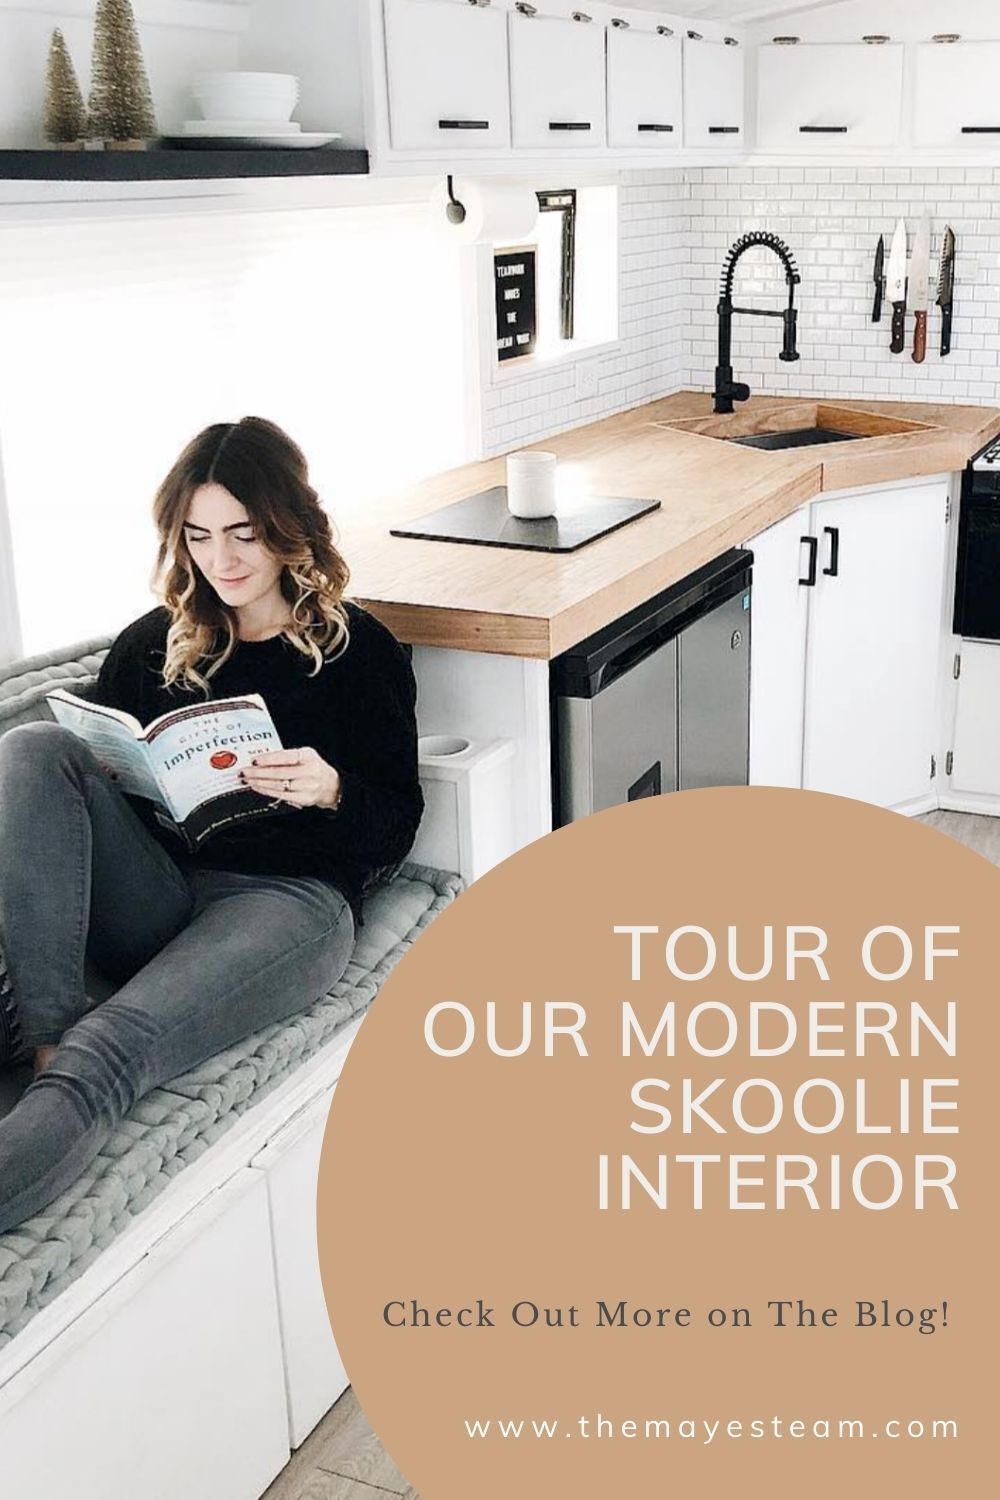 Debbie Mayes sits in the Skoolie kitchen reading a book. Image overlaid with text that reads Tour of Our Modern Skoolie Interior Check out More on The Blog!